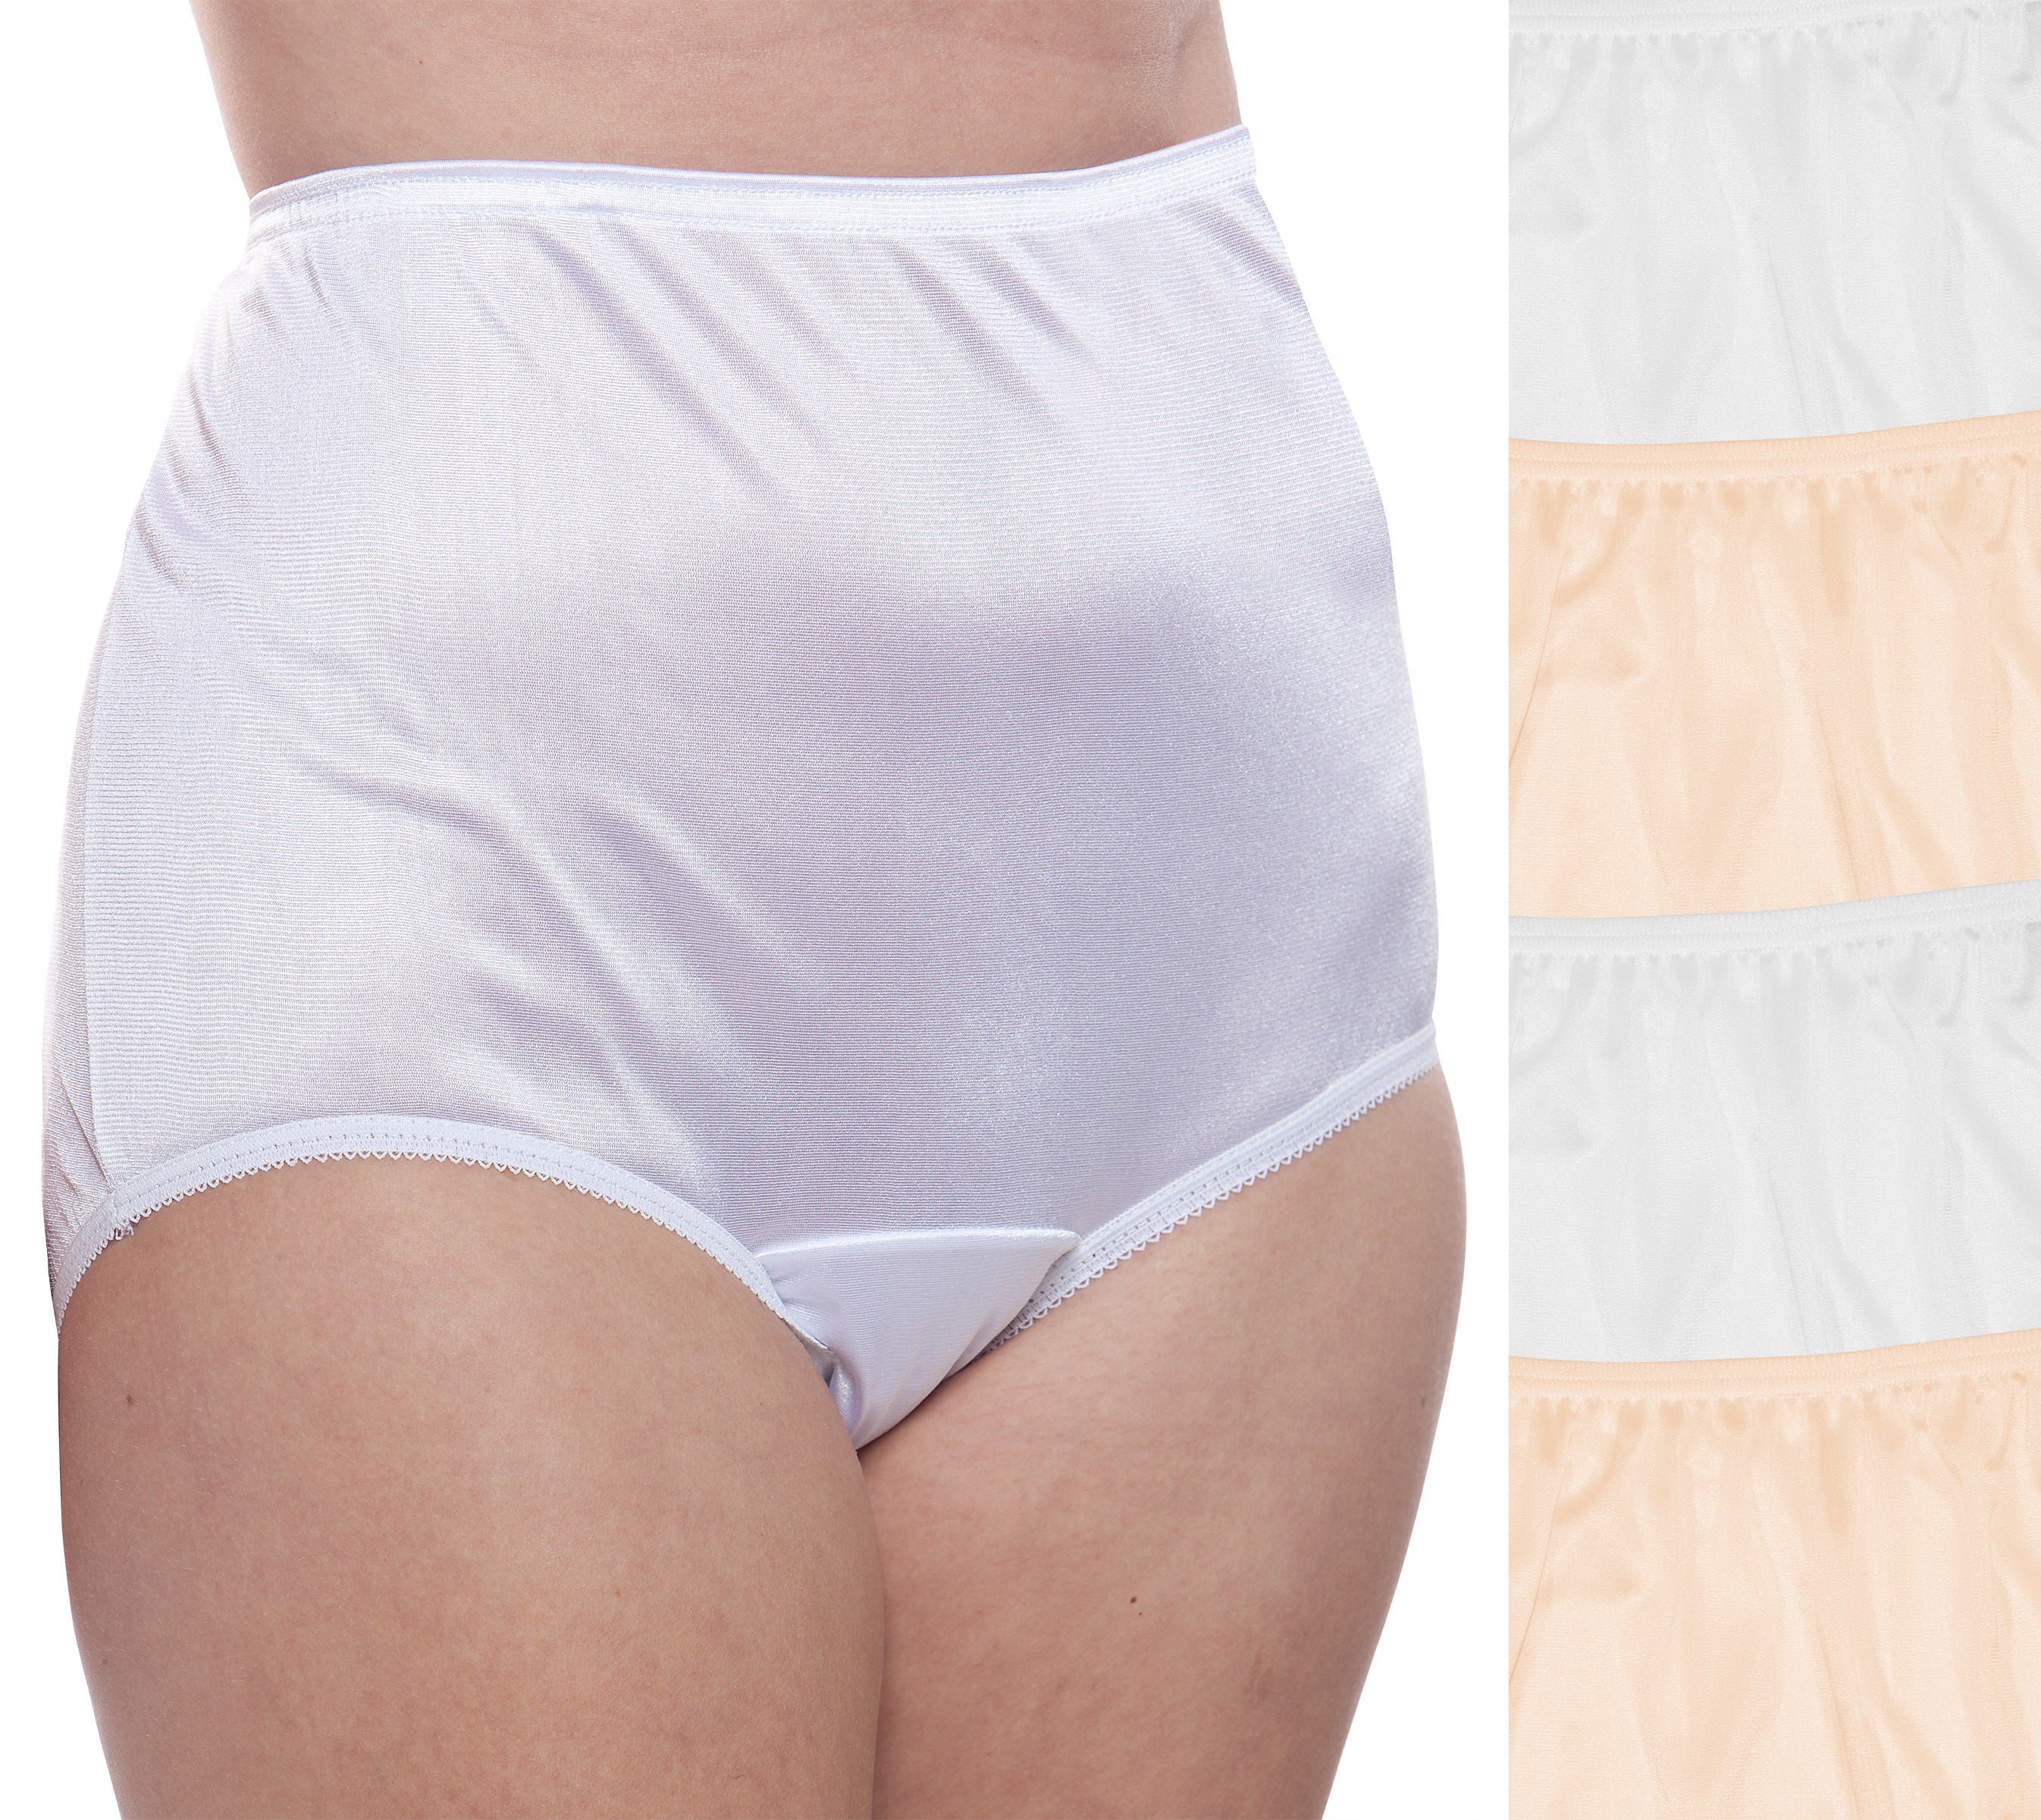 Classic Nylon, Full Coverage Brief Panty- White 4 or 12 Pack